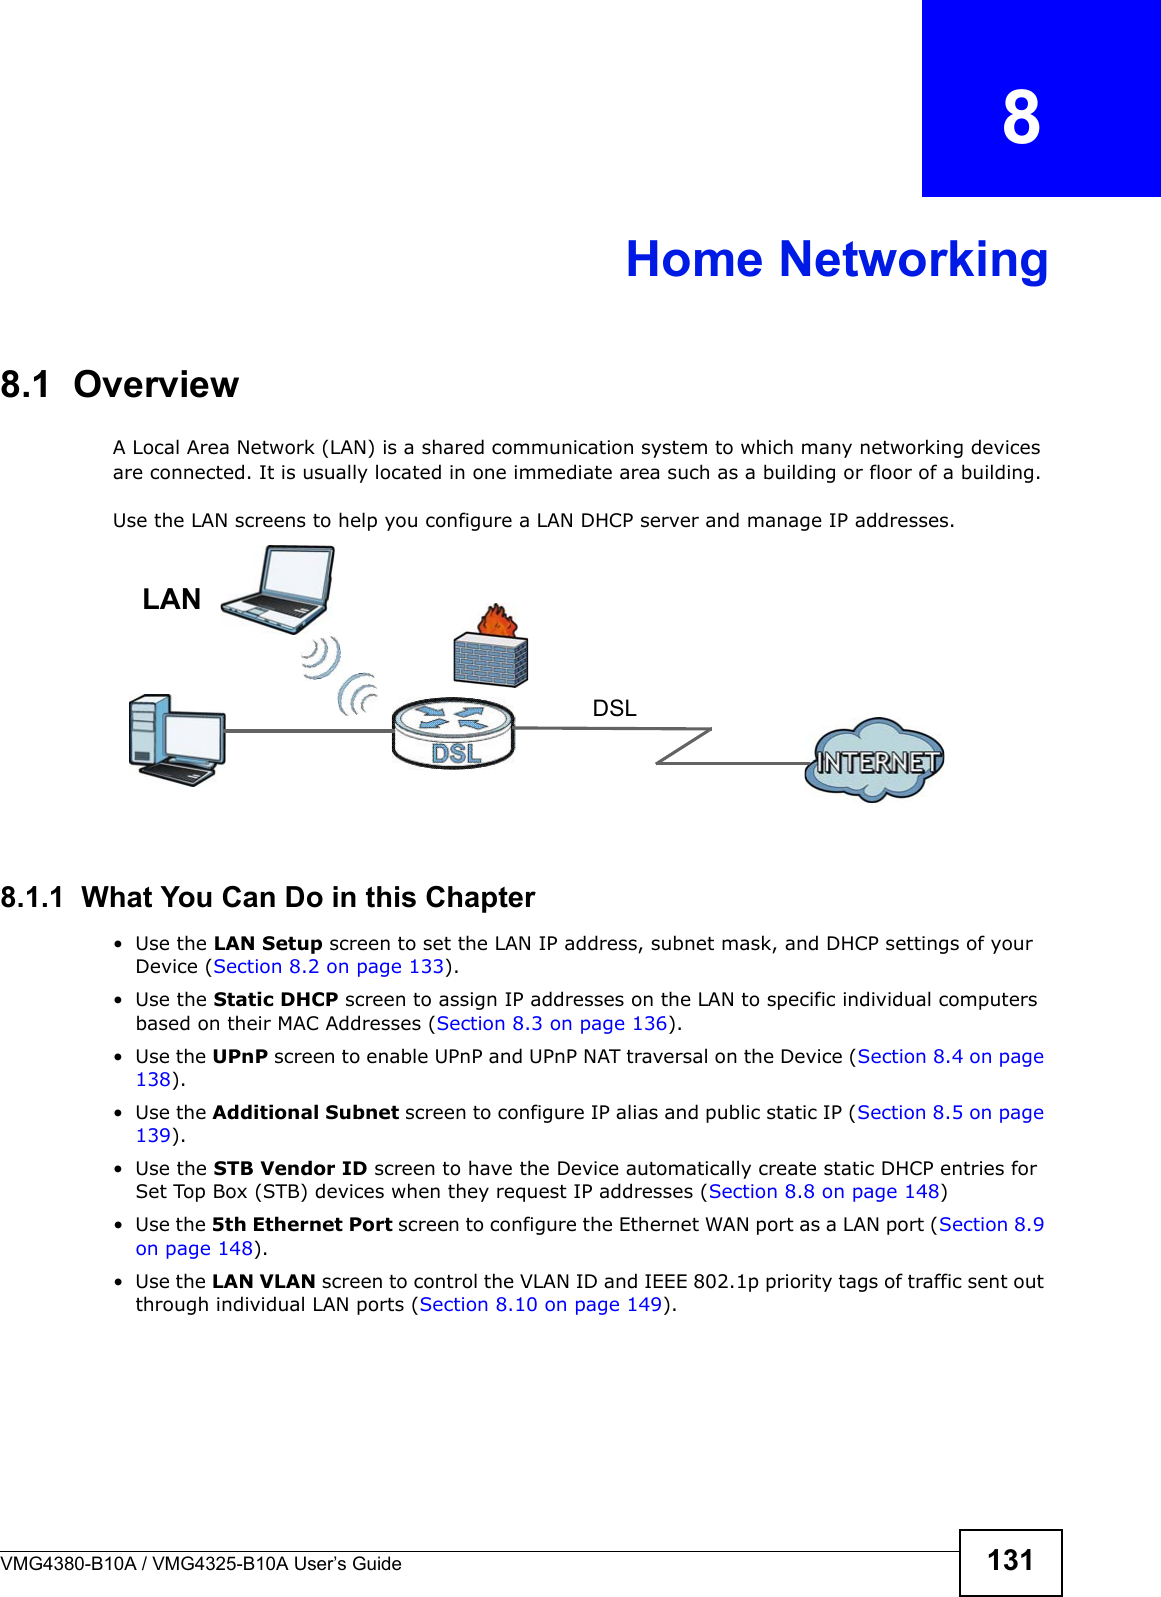 VMG4380-B10A / VMG4325-B10A User’s Guide 131CHAPTER  8Home Networking8.1  OverviewA Local Area Network (LAN) is a shared communication system to which many networking devices are connected. It is usually located in one immediate area such as a building or floor of a building.Use the LAN screens to help you configure a LAN DHCP server and manage IP addresses.8.1.1  What You Can Do in this Chapter• Use the LAN Setup screen to set the LAN IP address, subnet mask, and DHCP settings of your Device (Section 8.2 on page 133).• Use the Static DHCP screen to assign IP addresses on the LAN to specific individual computers based on their MAC Addresses (Section 8.3 on page 136).• Use the UPnP screen to enable UPnP and UPnP NAT traversal on the Device (Section 8.4 on page138).• Use the Additional Subnet screen to configure IP alias and public static IP (Section 8.5 on page139).• Use the STB Vendor ID screen to have the Device automatically create static DHCP entries for Set Top Box (STB) devices when they request IP addresses (Section 8.8 on page 148)• Use the 5th Ethernet Port screen to configure the Ethernet WAN port as a LAN port (Section 8.9 on page 148).• Use the LAN VLAN screen to control the VLAN ID and IEEE 802.1p priority tags of traffic sent out through individual LAN ports (Section 8.10 on page 149).DSLLAN